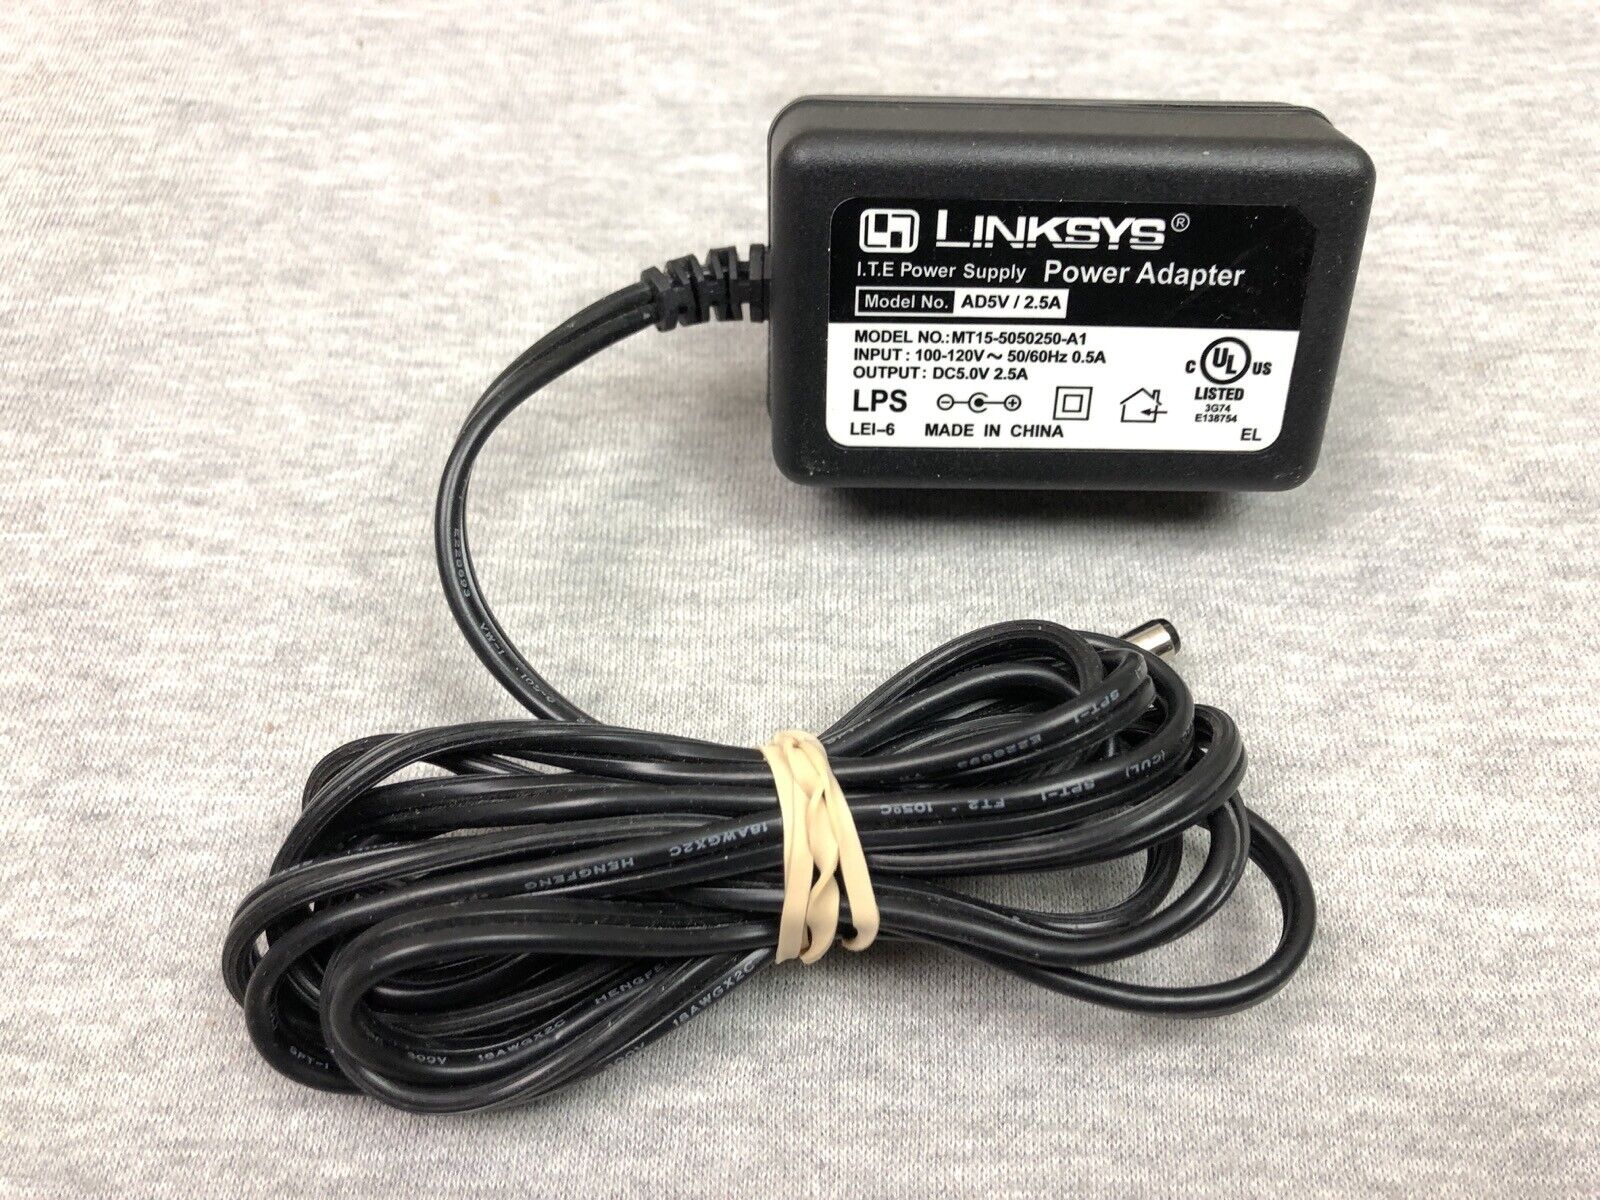 Linksys AD5V AC Adapter Output DC 5V 2.5A Power Supply Brand: Linksys Type: AC/DC Adapter UPC: Does not apply Outpu